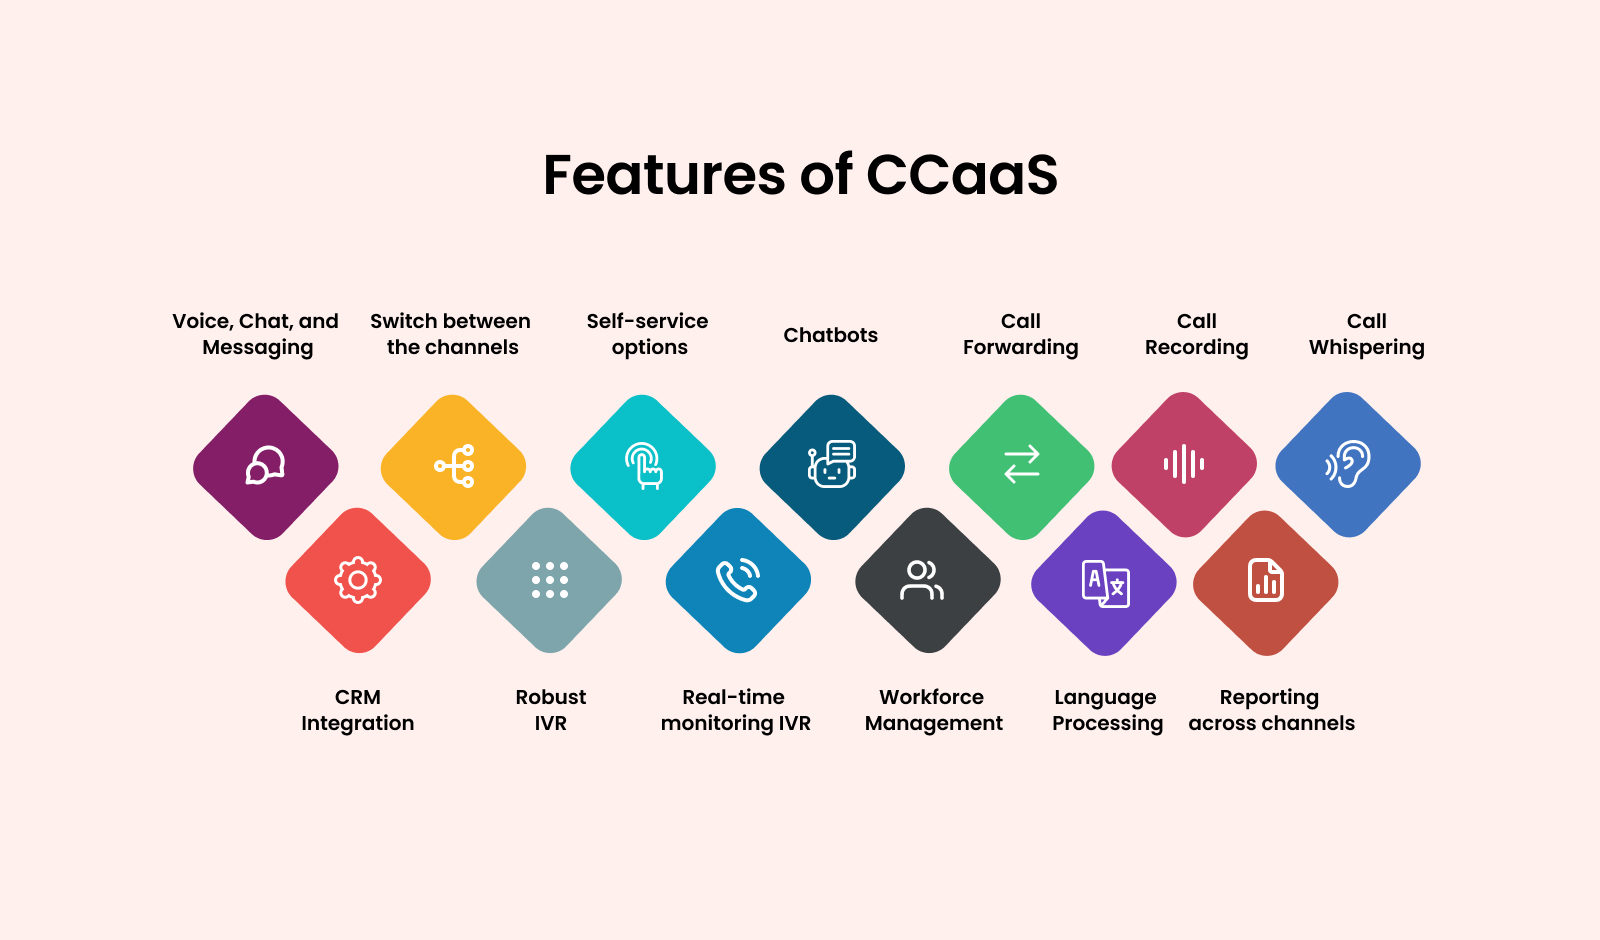  Features of CCaaS: